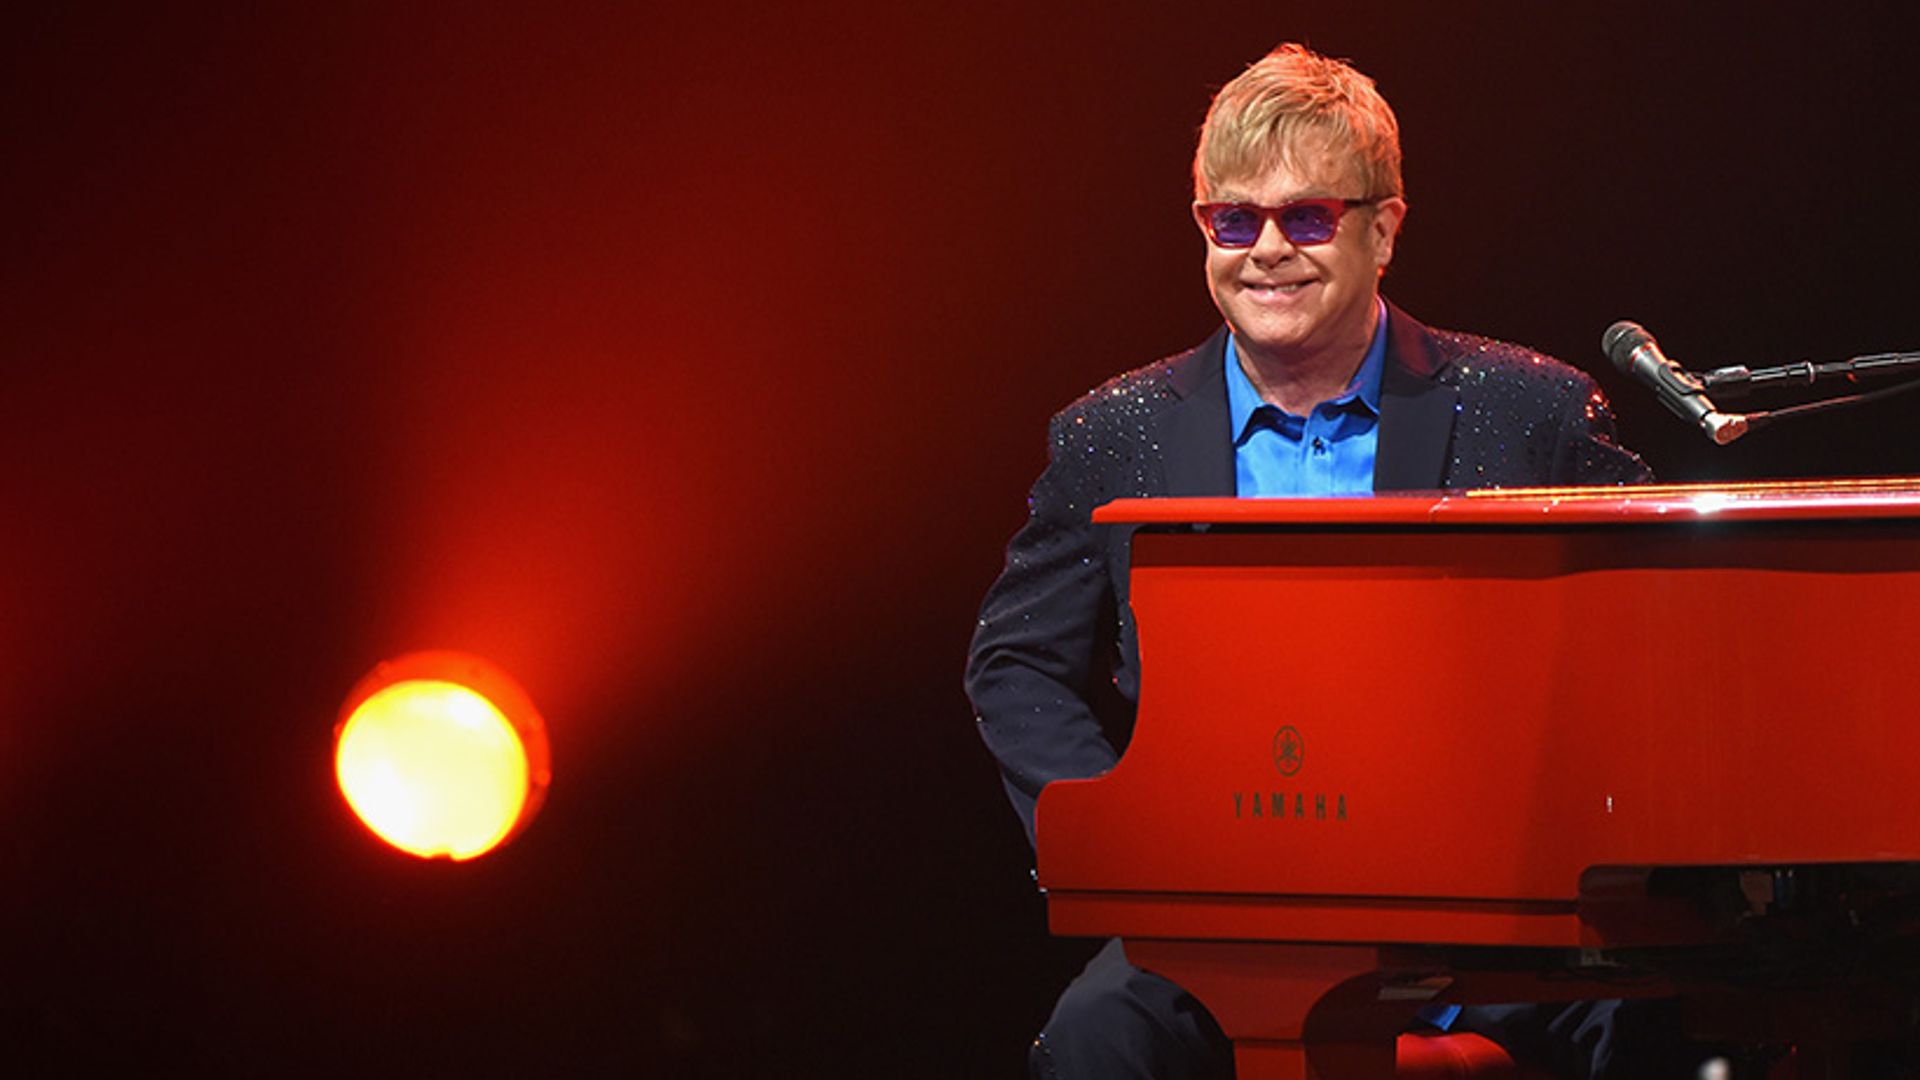 Sir Elton John shocks fans with retirement news to spend time with children